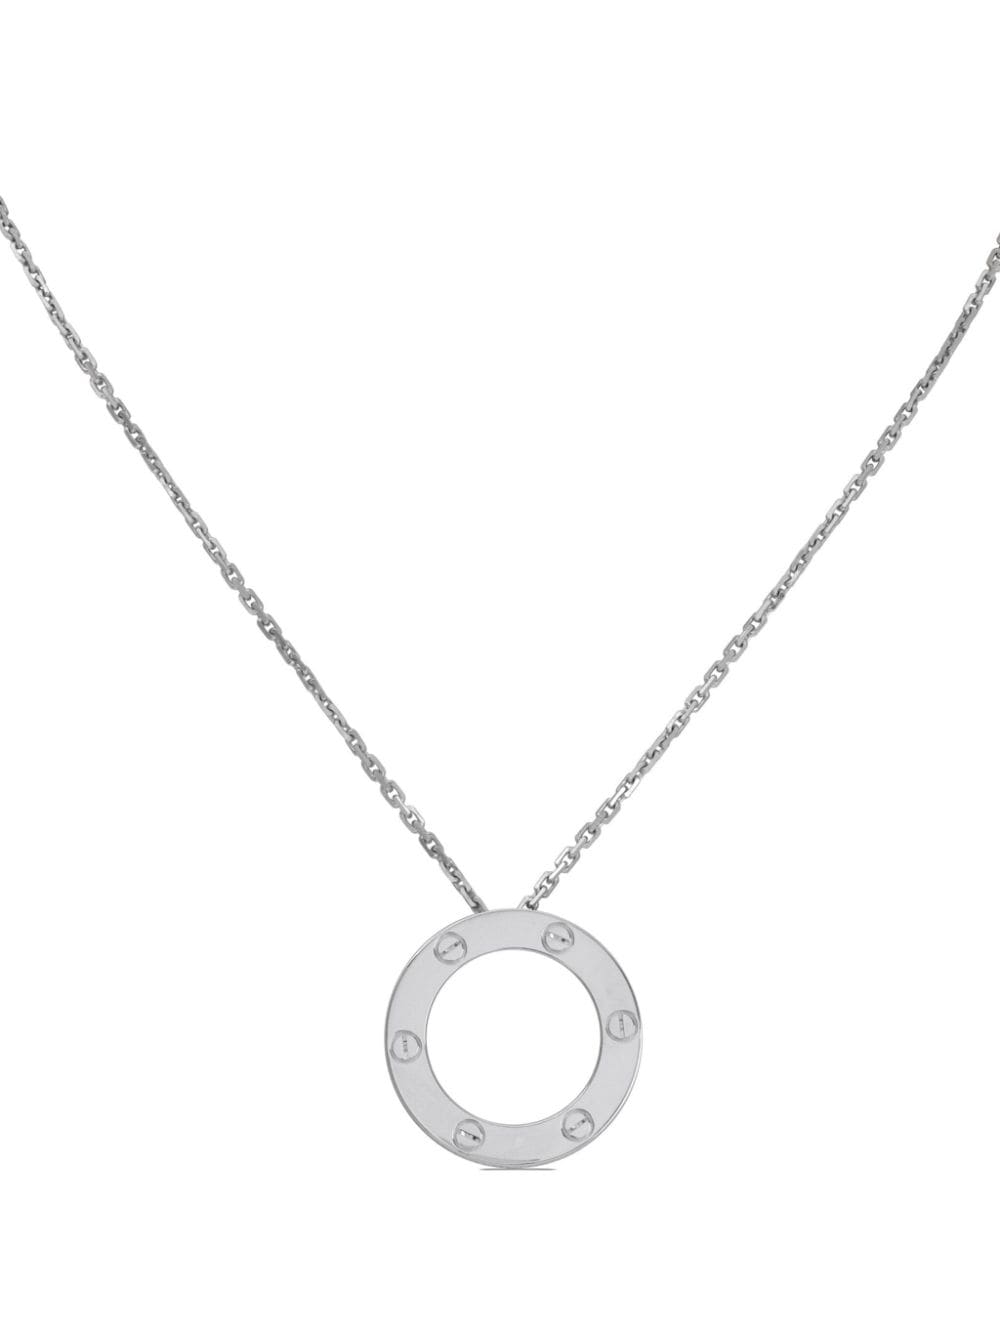 Image 1 of Cartier 2021 pre-owned 18kt white gold Love pendant necklace